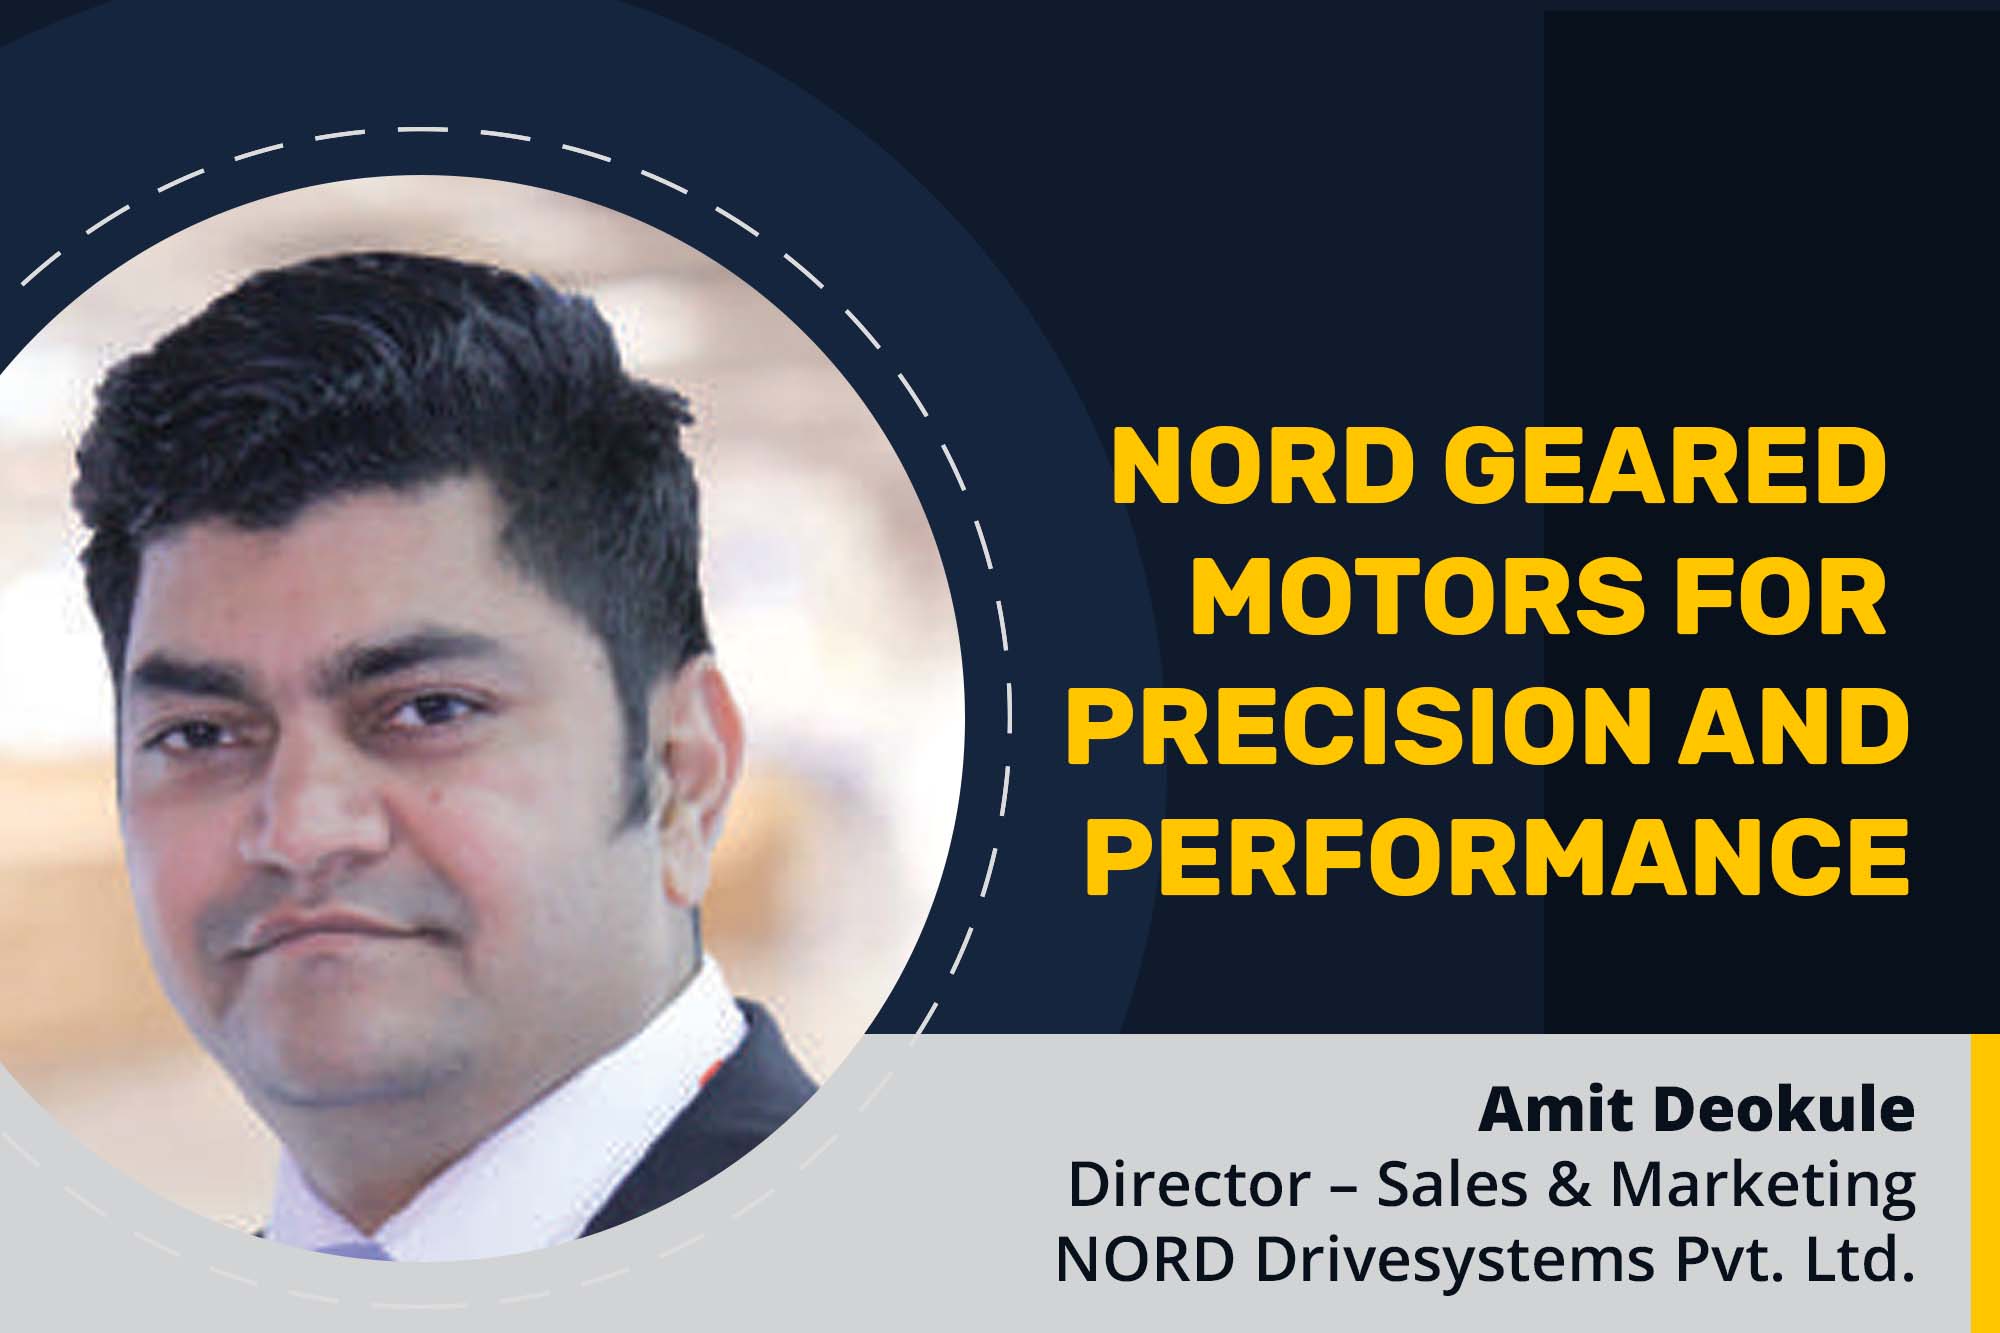 NORD geared motors for precision and performance